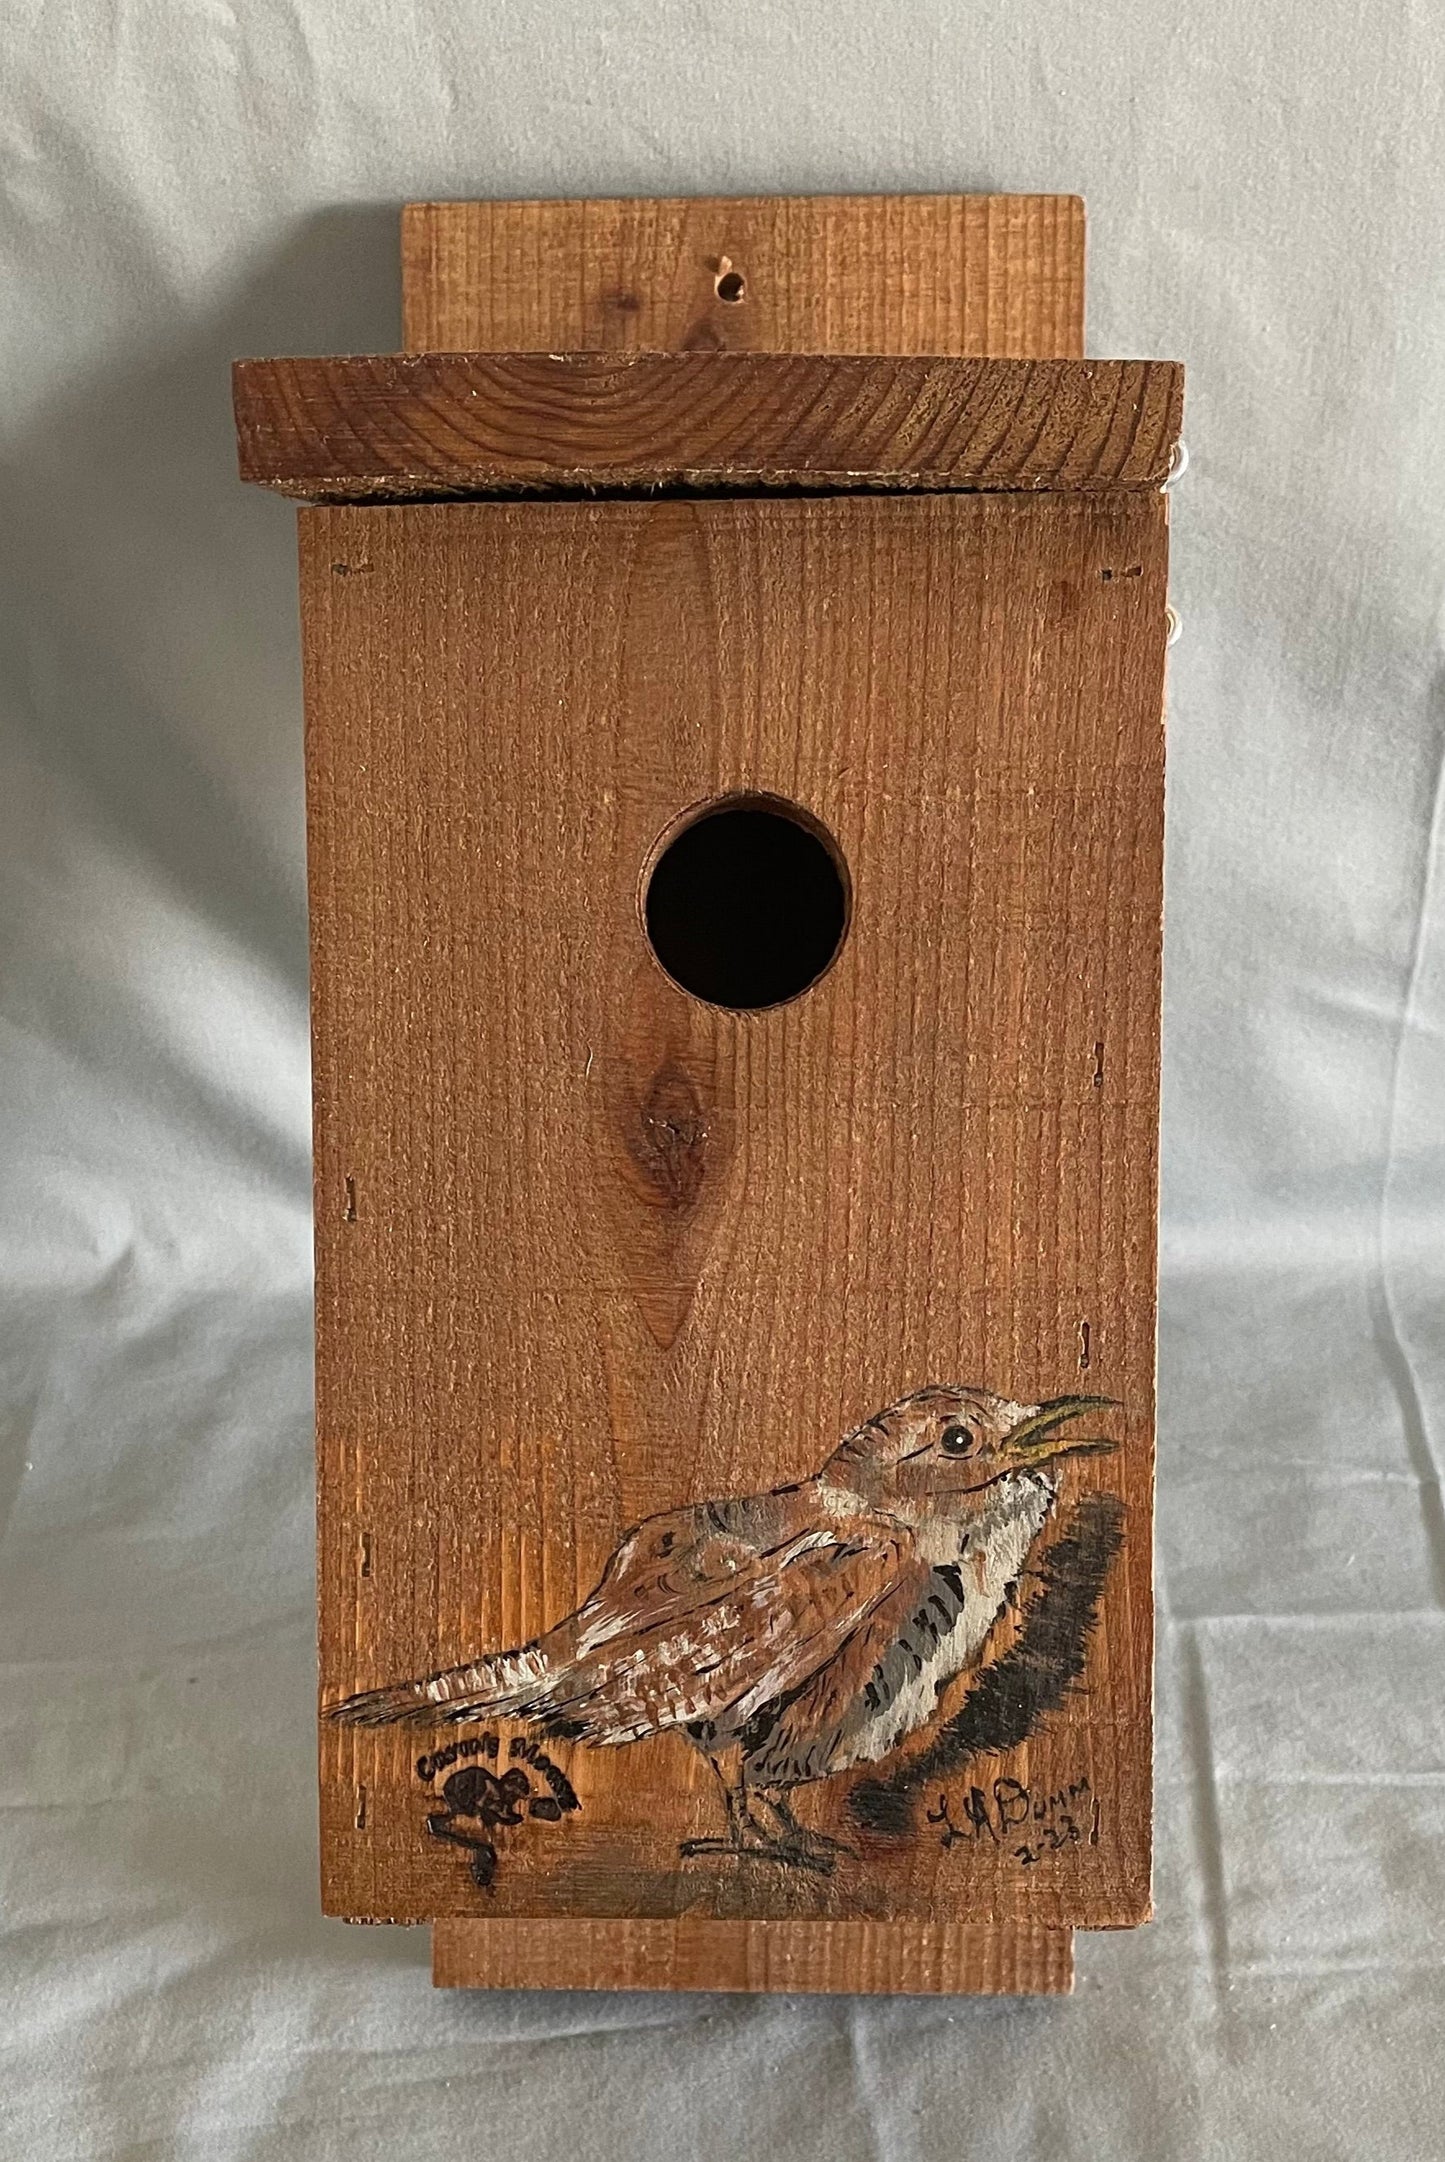 All cedar box, roof and floor with a large wren painted on the front  Hook and eye bolt closure in the roof allows for easy access to clean the box  Two holes drilled into the back board for screws when hanging the box  Wren nesting boxes will also house Chickadees and Finches  14" tall x 5" wide x 6 1/2" long